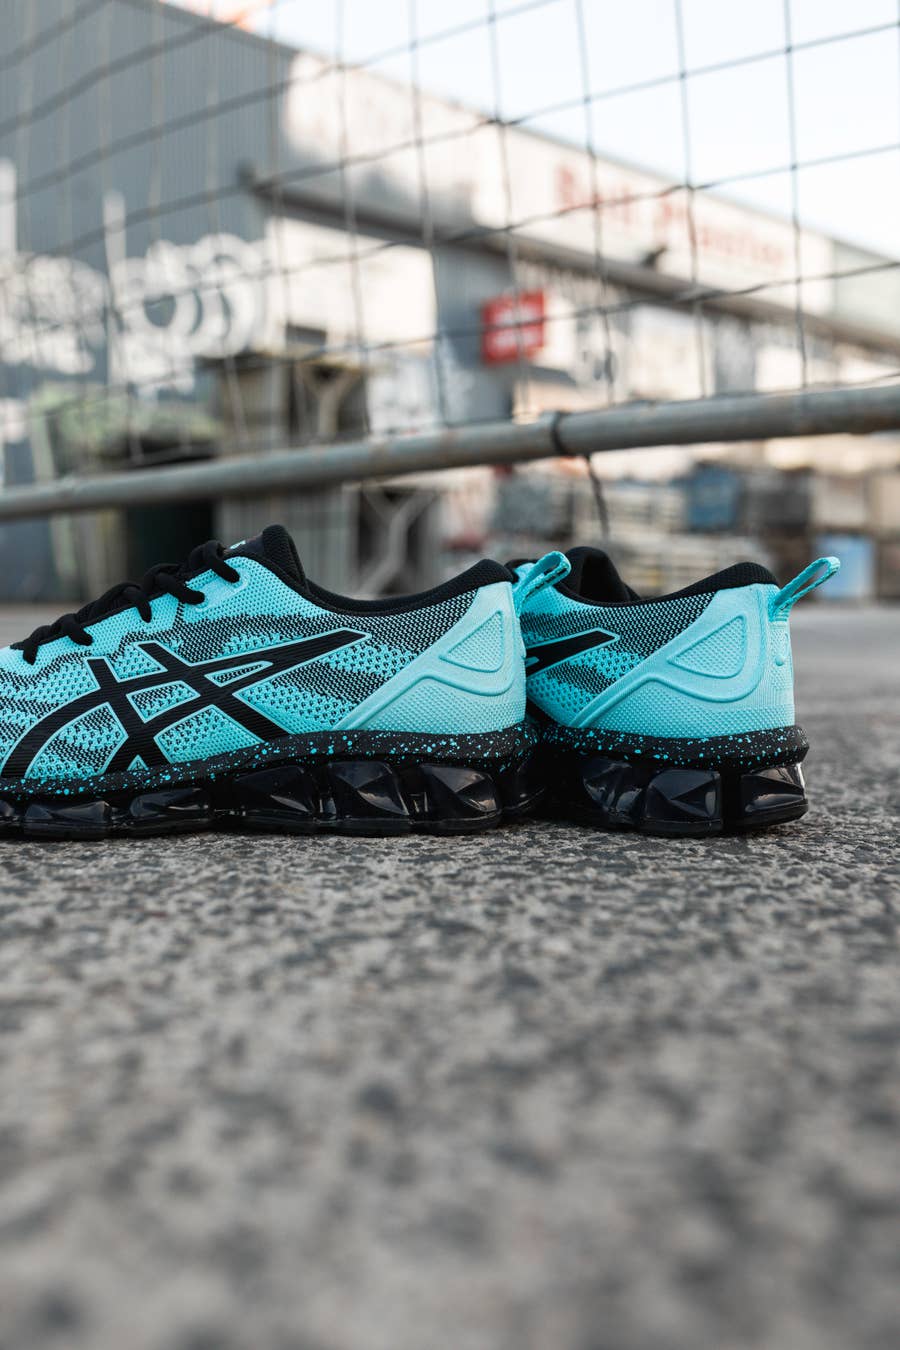 JD Sports a World Exclusive Collab With ASICS, the Gel-Quantum 360 VII "Tokyo Neon" |